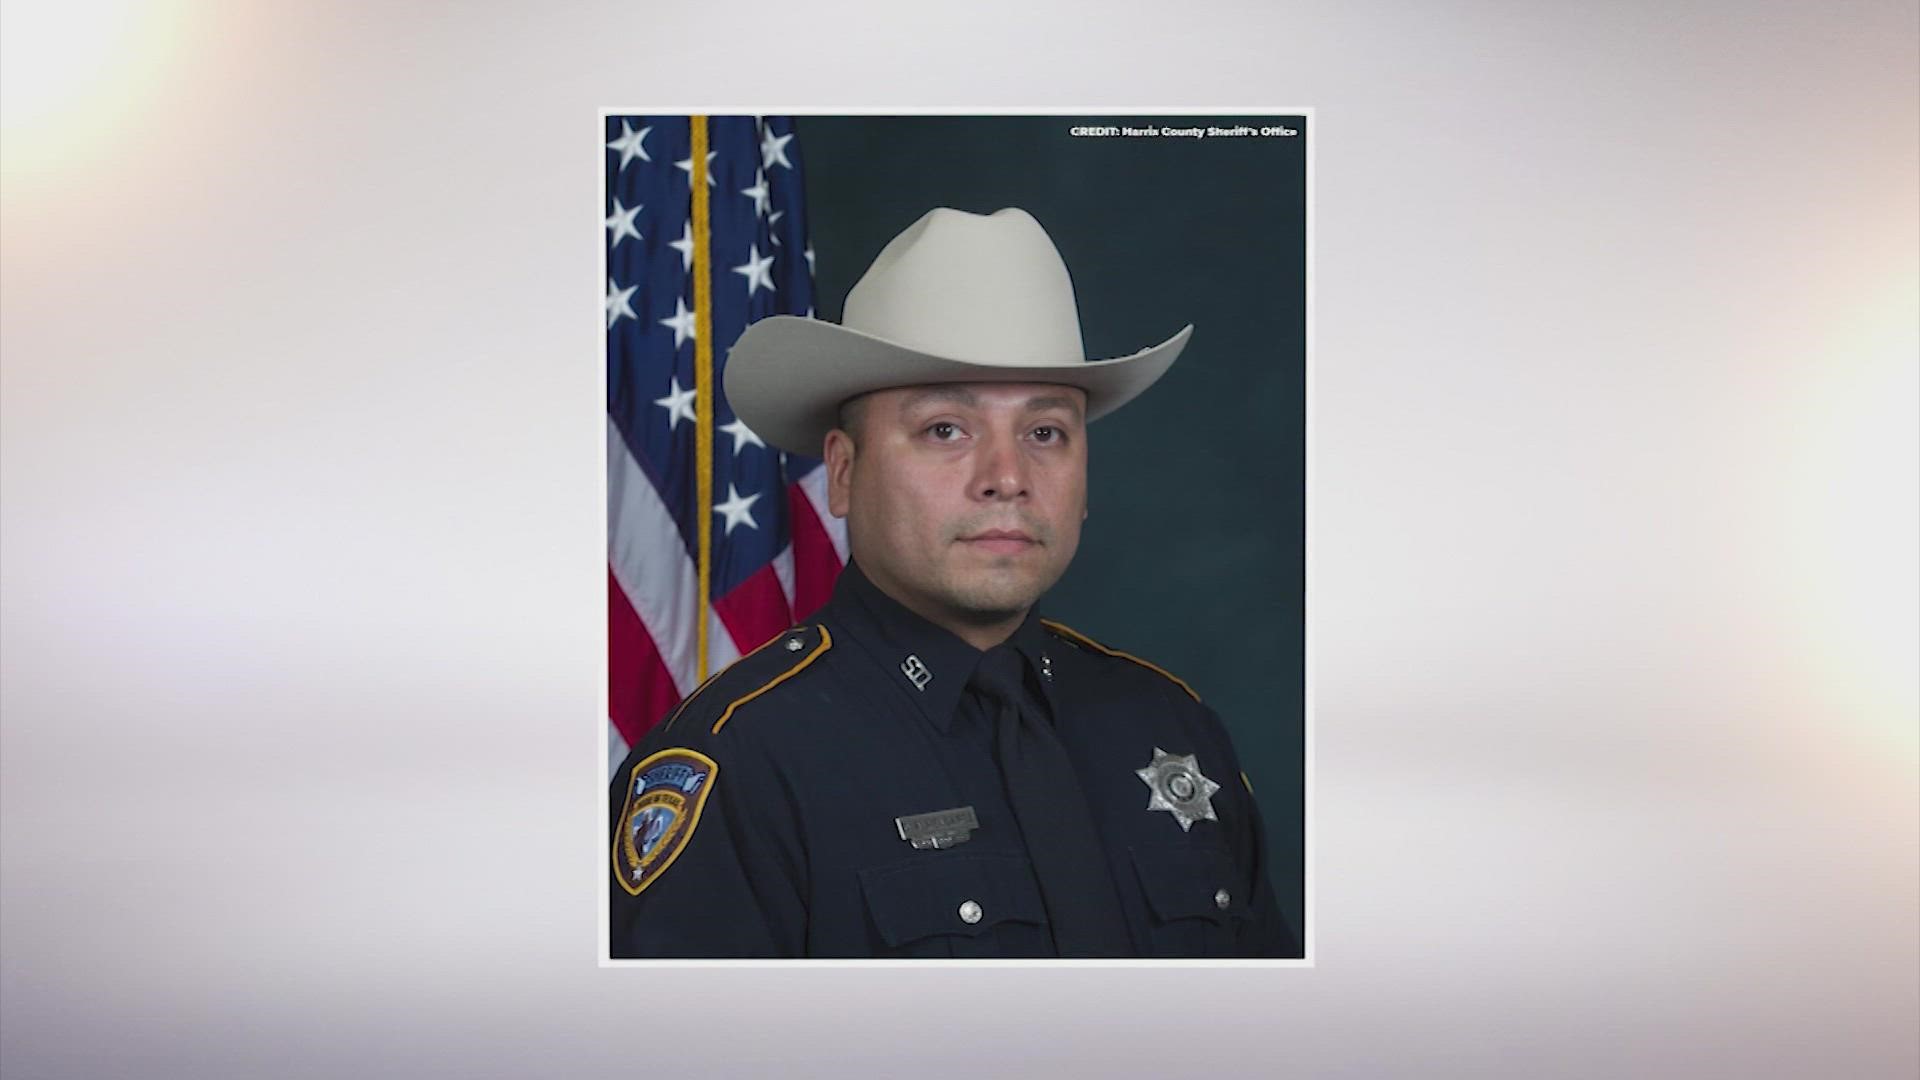 Deputy Darren Almendarez was shot and killed when he confronted three suspects who were attempting to steal his catalytic converter.